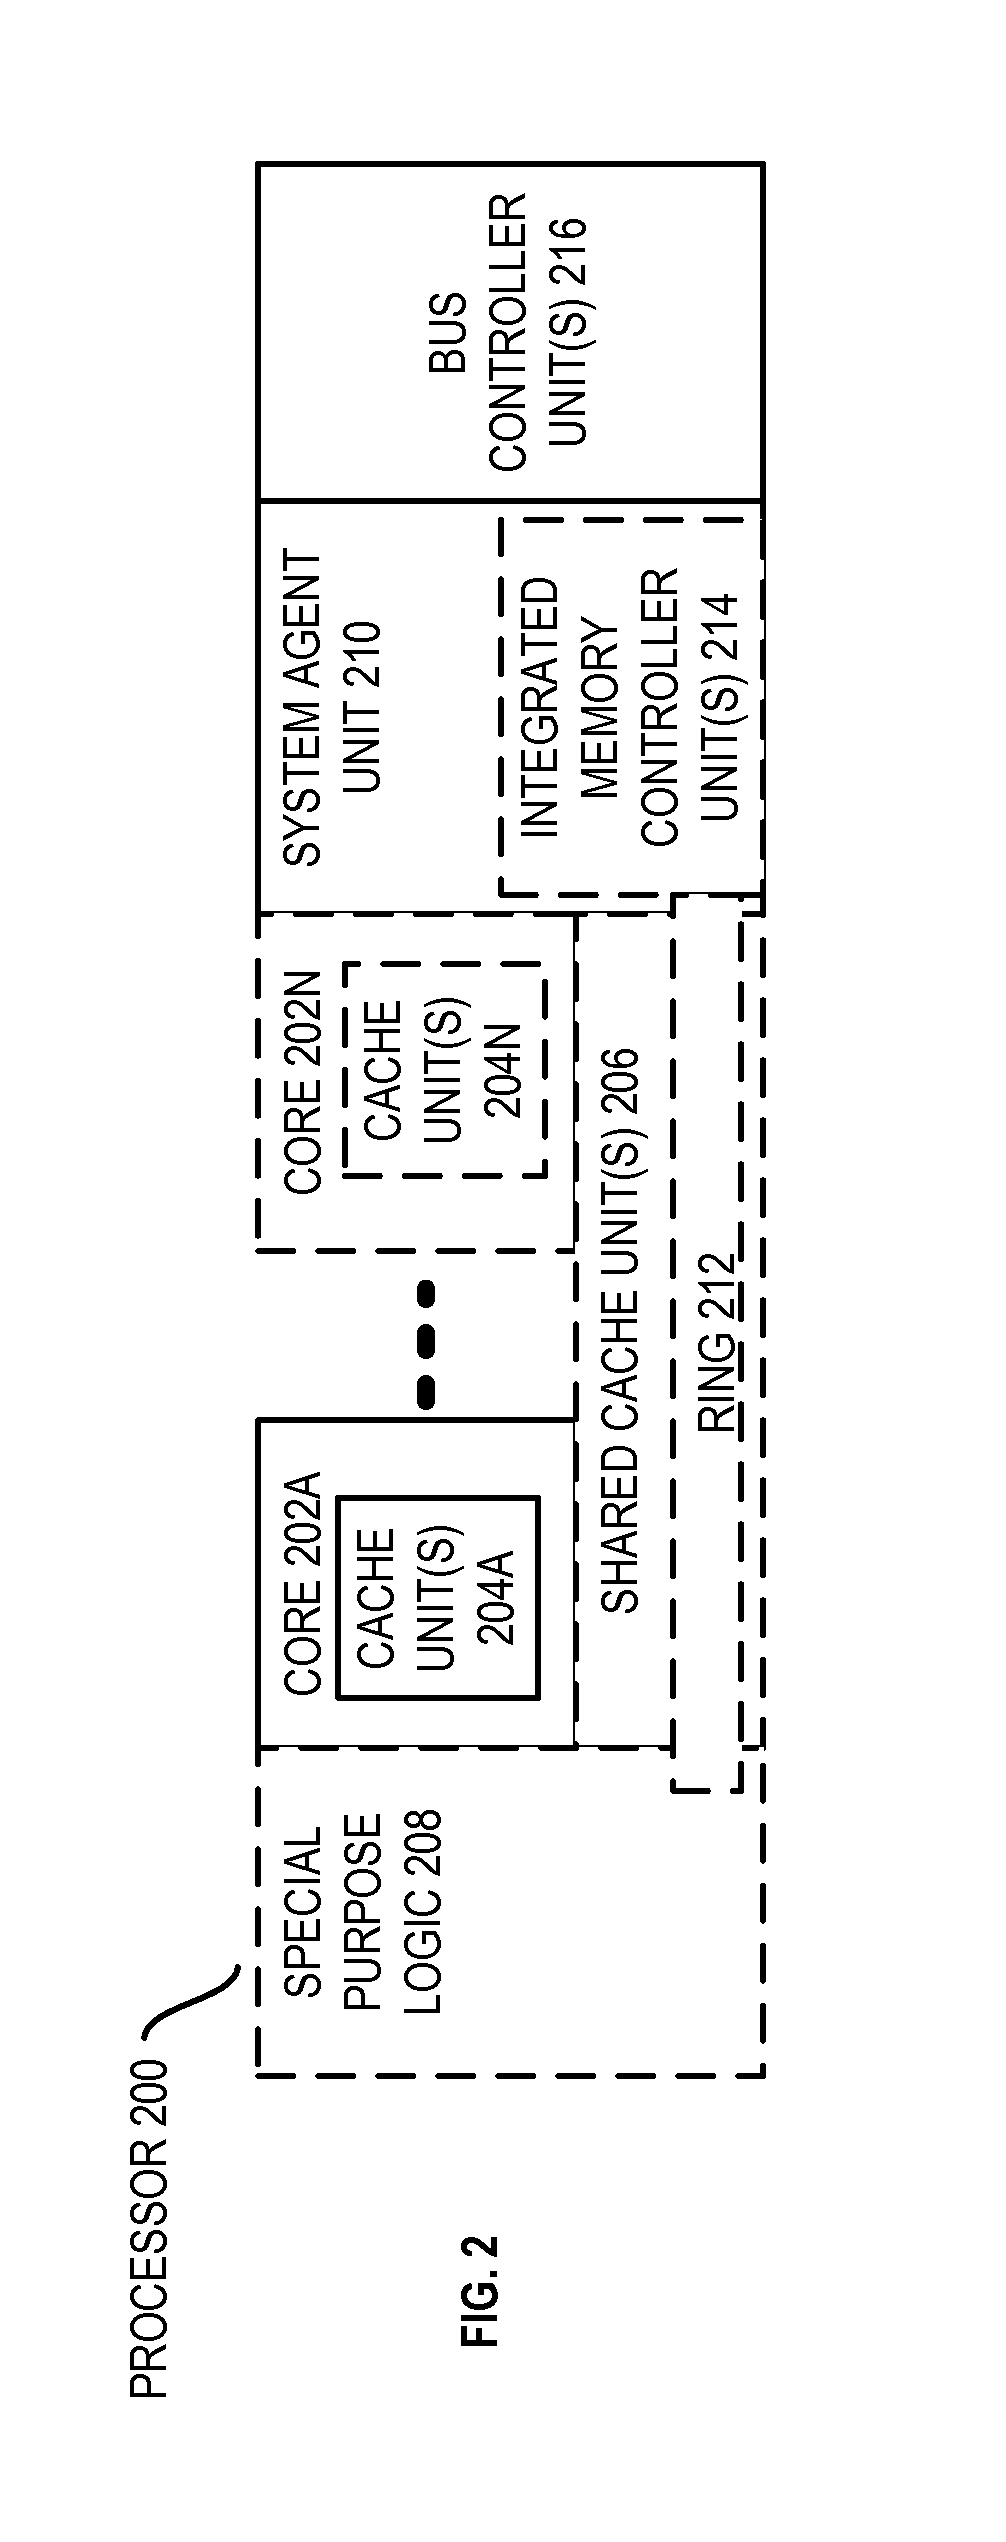 Apparatus and method for efficiently implementing a processor pipeline